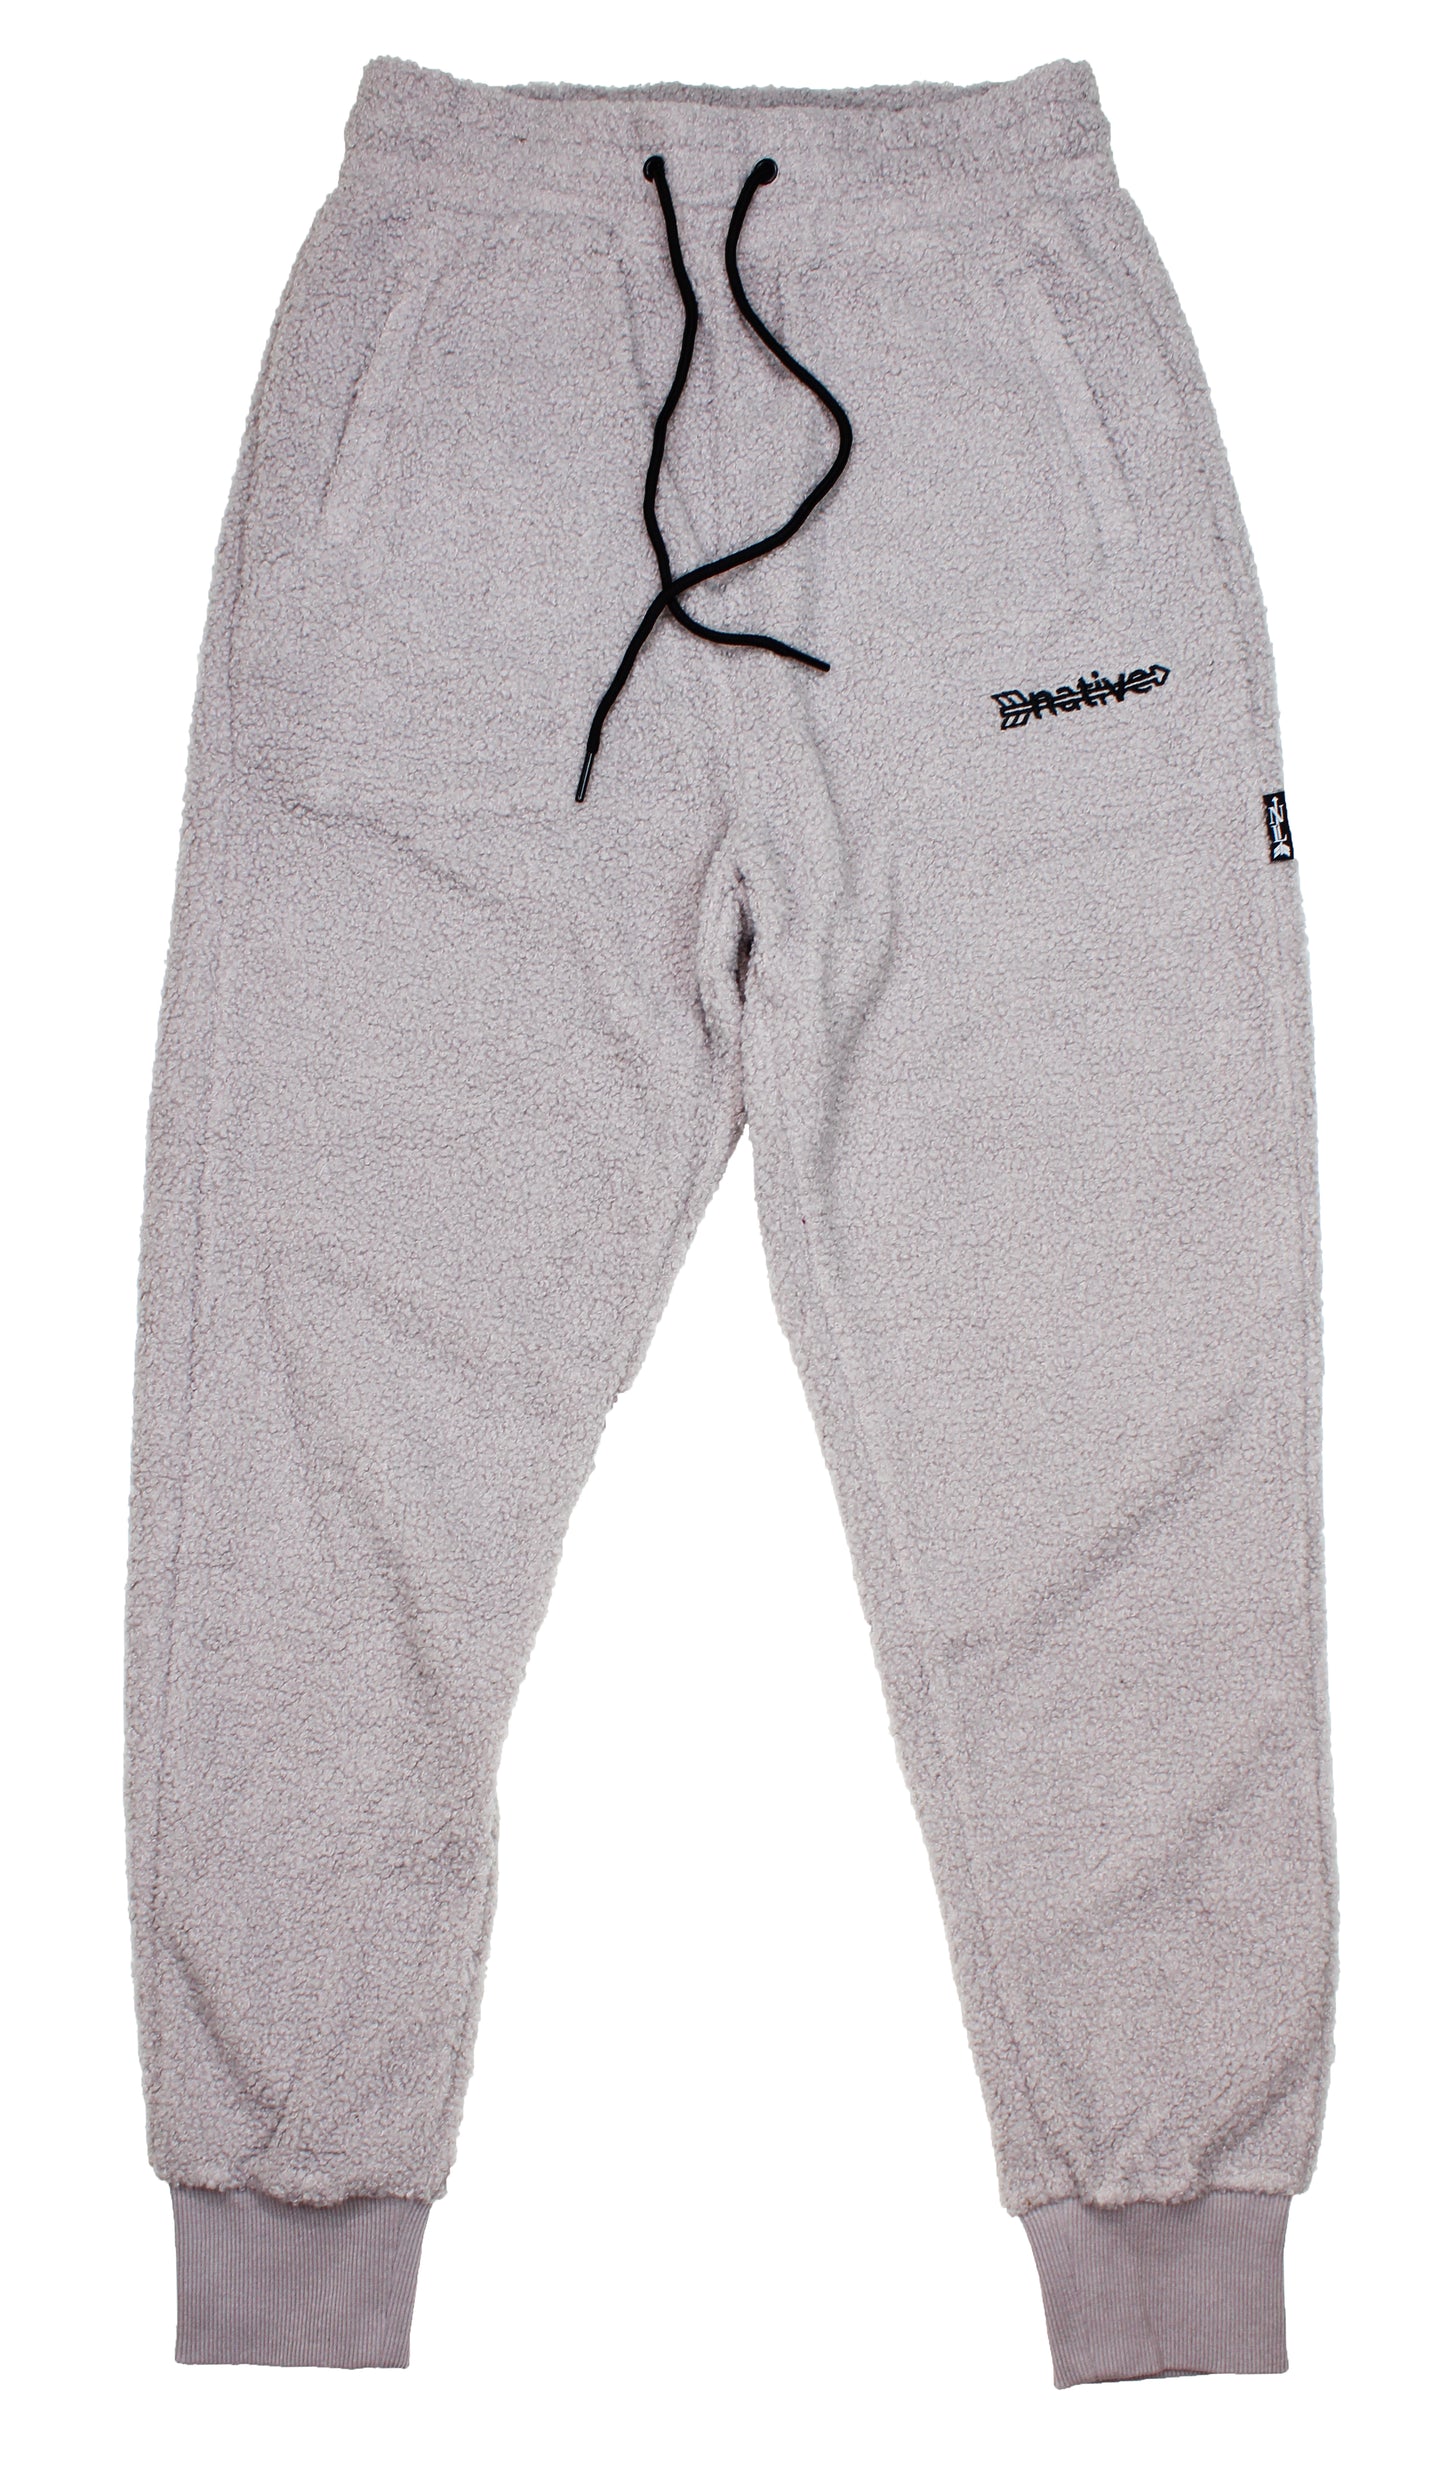 sherpa joggers in heather gray